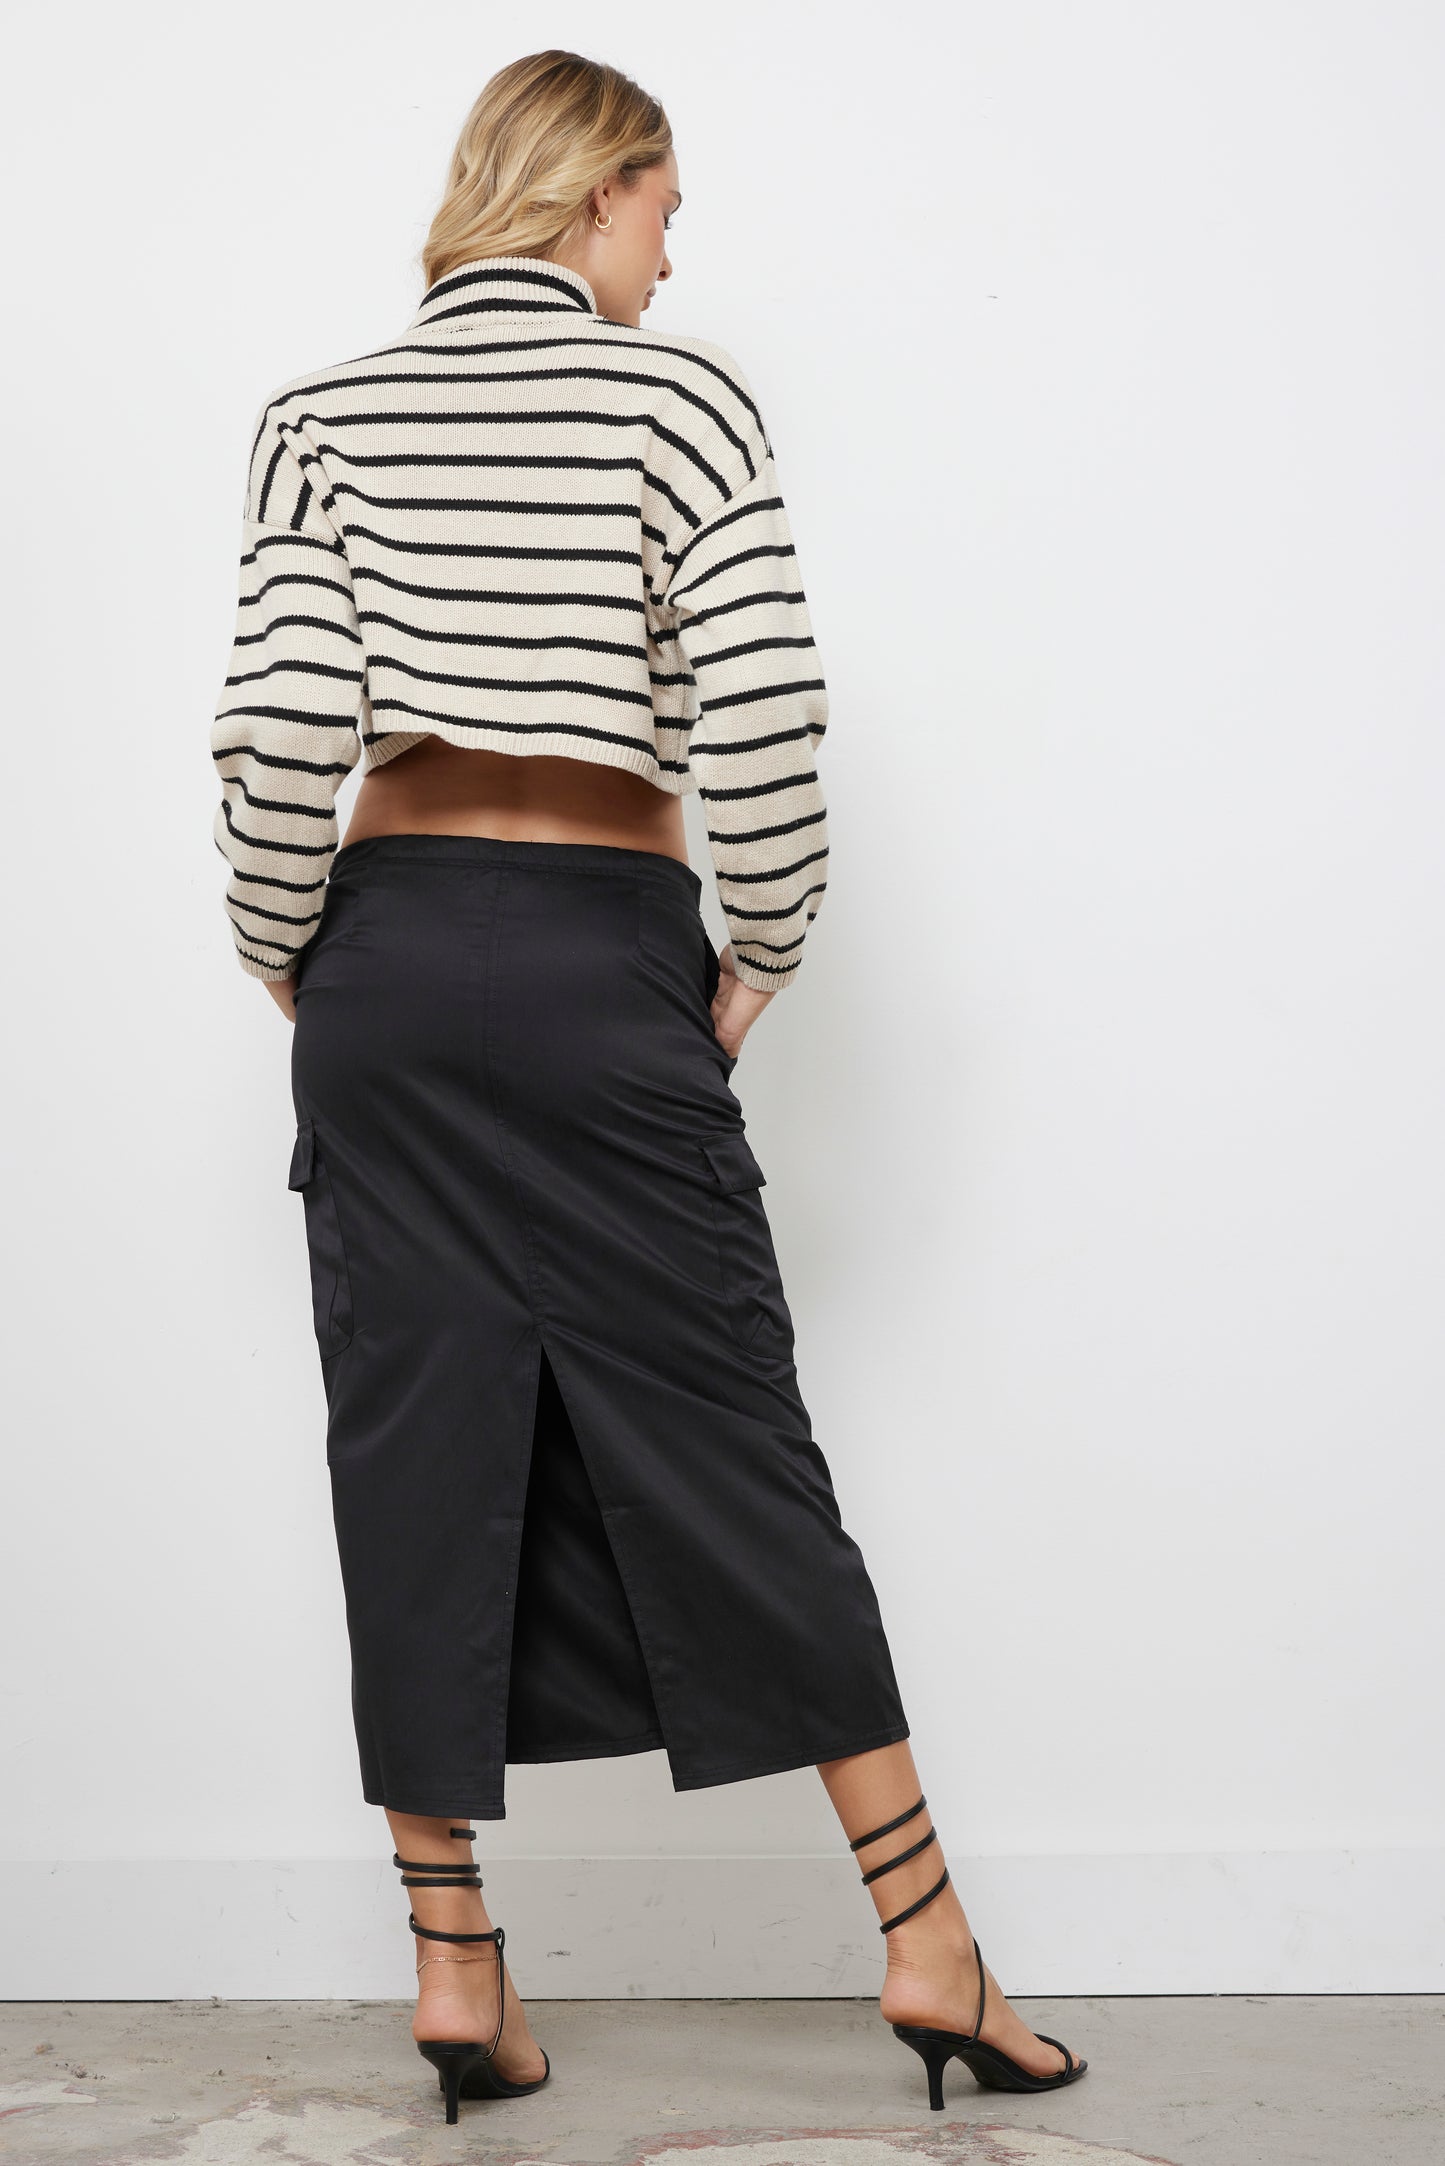 The Stripe Is Right Knit Top